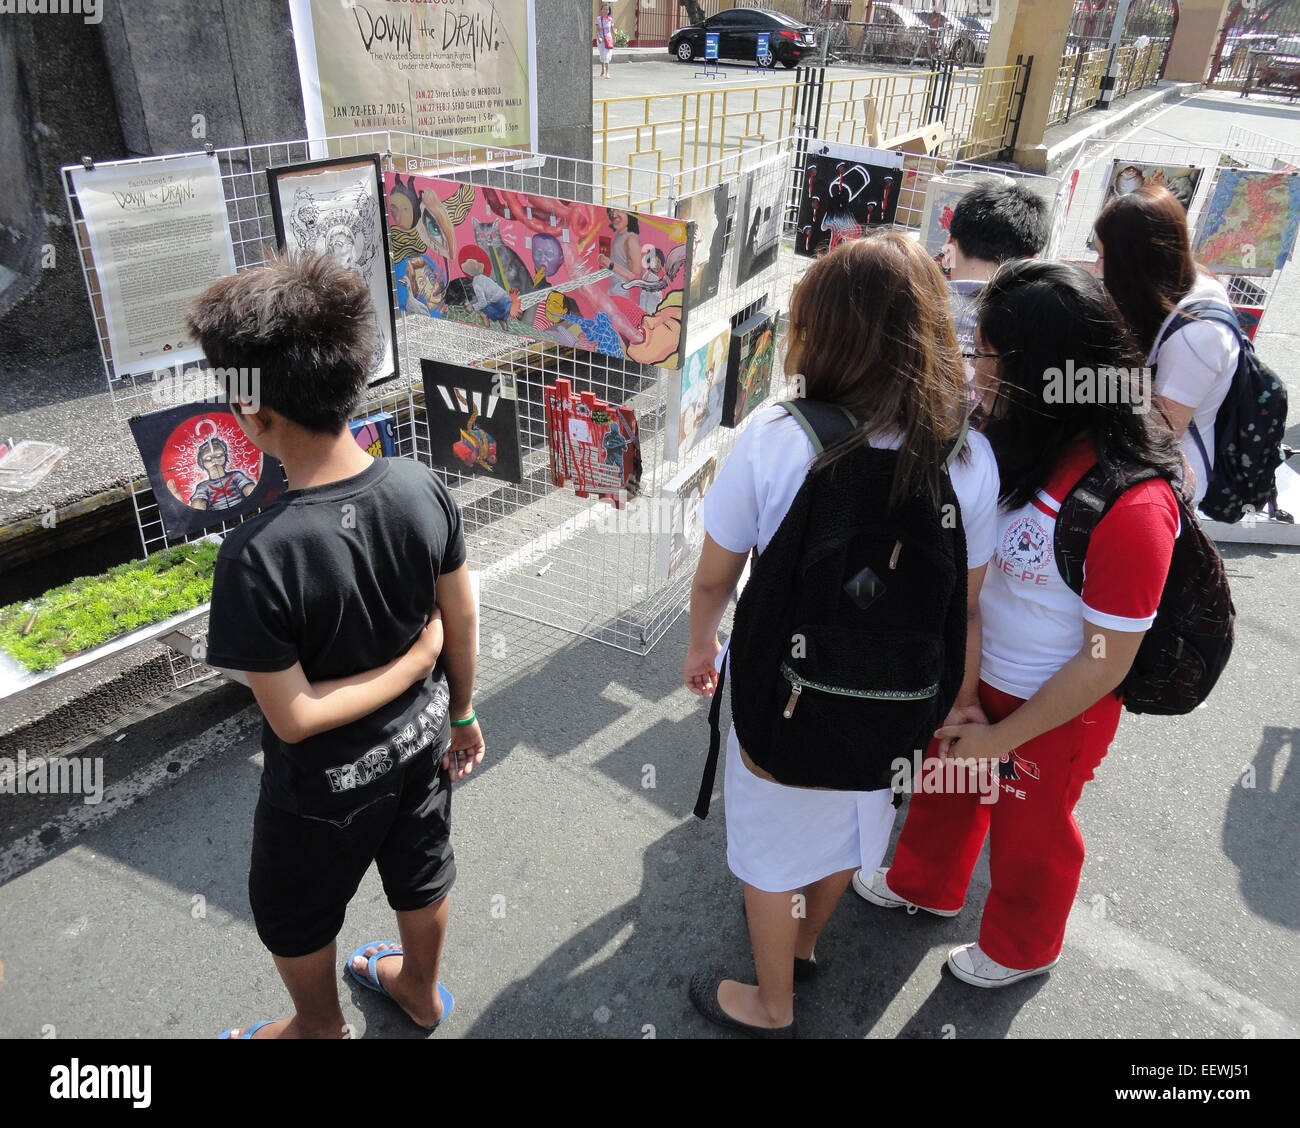 Students from a nearby university stop by an art exhibit in Mendiola Bridge, as Filipino protesters commemorate the 28th anniversary of the Mendiola Massacre that occured under the administration of President Benigno Aquino III's mother, former President Corazon Aquino, where thirteen farmers were killed. Anakpawis Partylist representative Fernando Hicap has filed a bill at Congress proposing to declare January 22, the anniversary of the Mendiola Massacre, a special holiday called 'Farmer's Day.' © Richard James Mendoza/Pacific Press/Alamy Live News Stock Photo